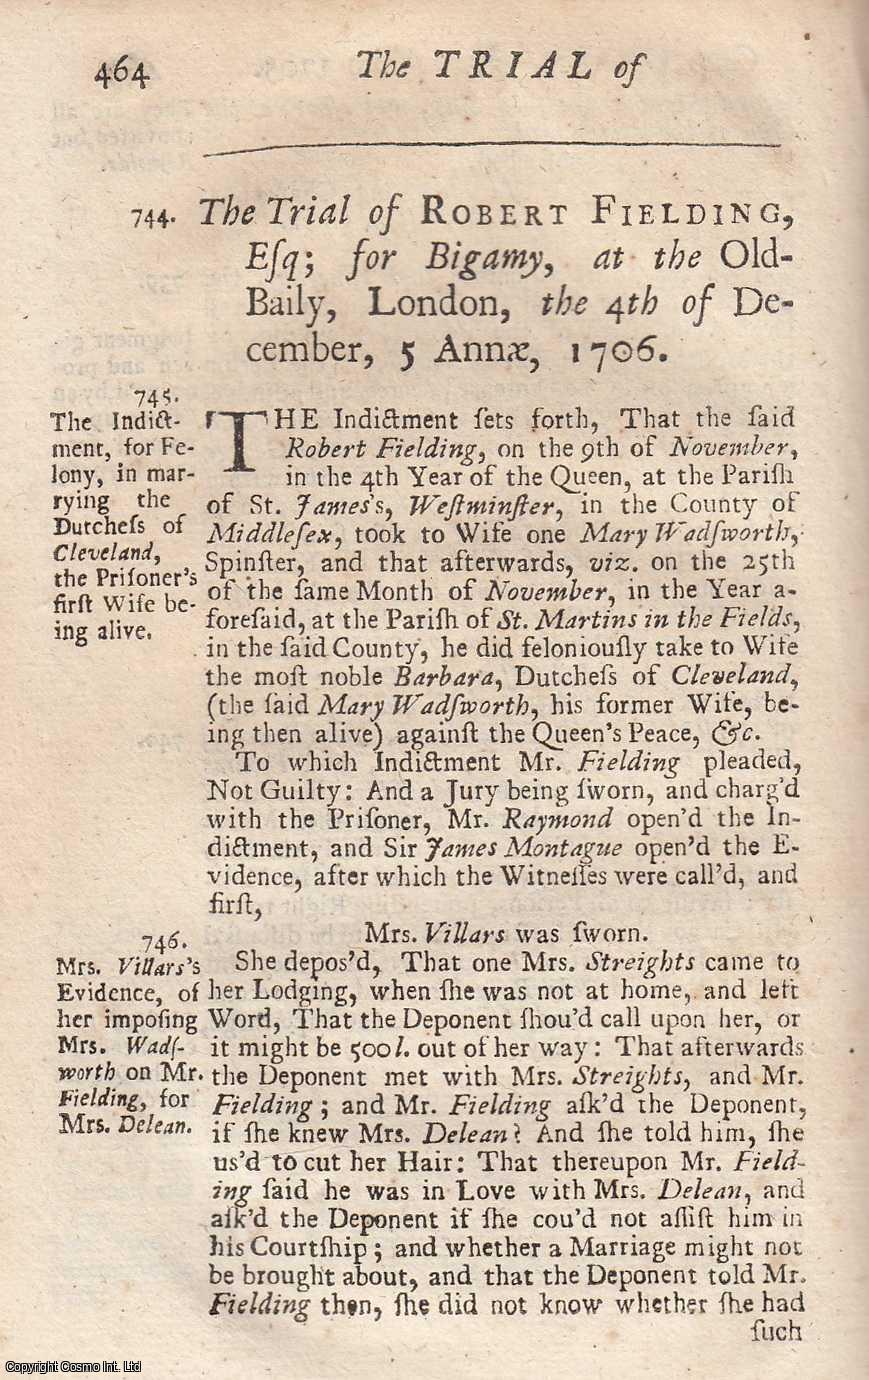 [Trial] - The Trial of Robert Feilding, esq. at The Old Bailey, For Bigamy, in Marrying The Duchess of Cleveland, his Former Wife Being Then Living. A.D. 1706. An original report from the collected Tryals for High Treason, and Other Crimes, 1720.